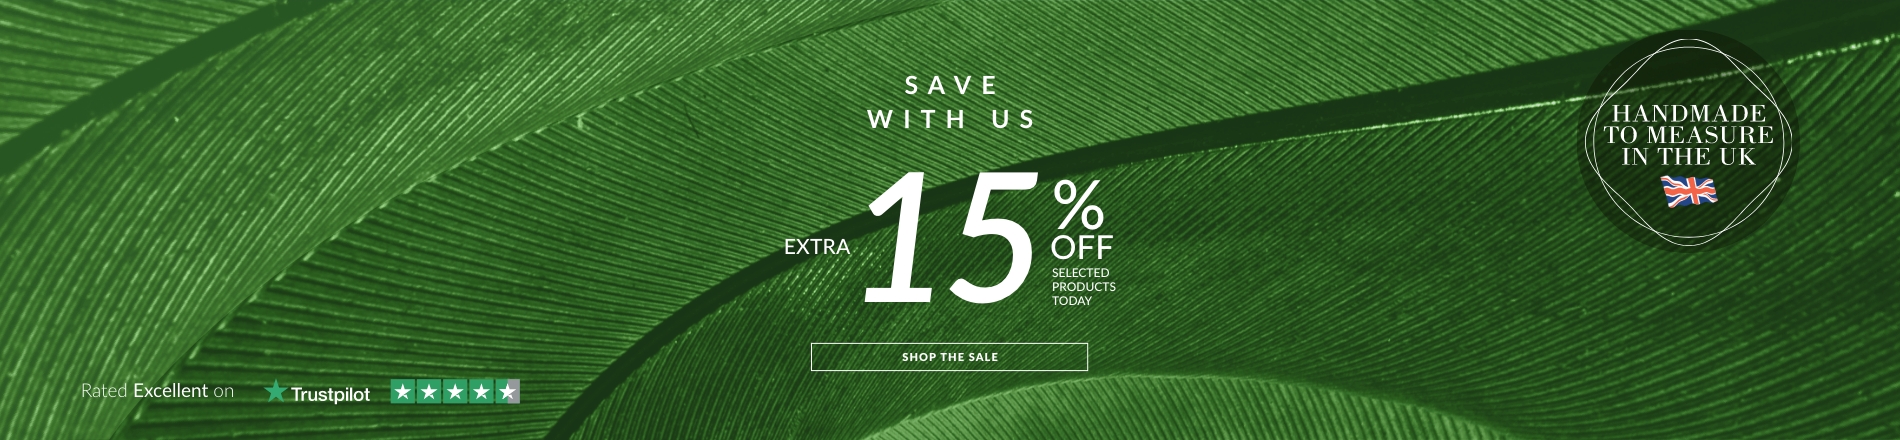 Pleated 15% May 22